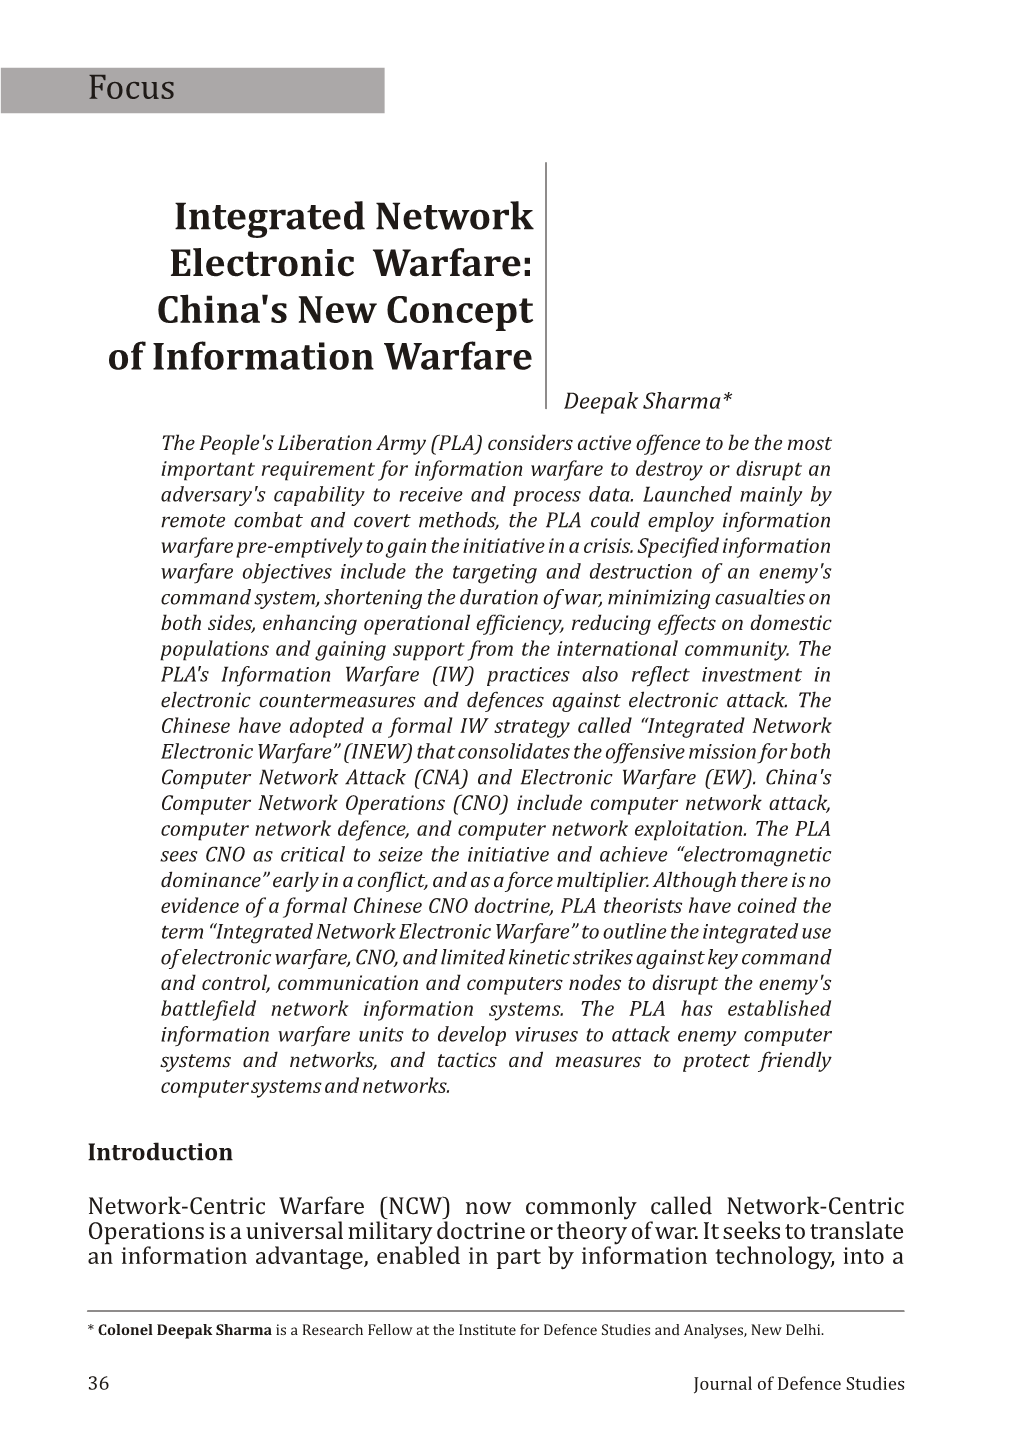 Integrated Network Electronic Warfare: China's New Concept Of